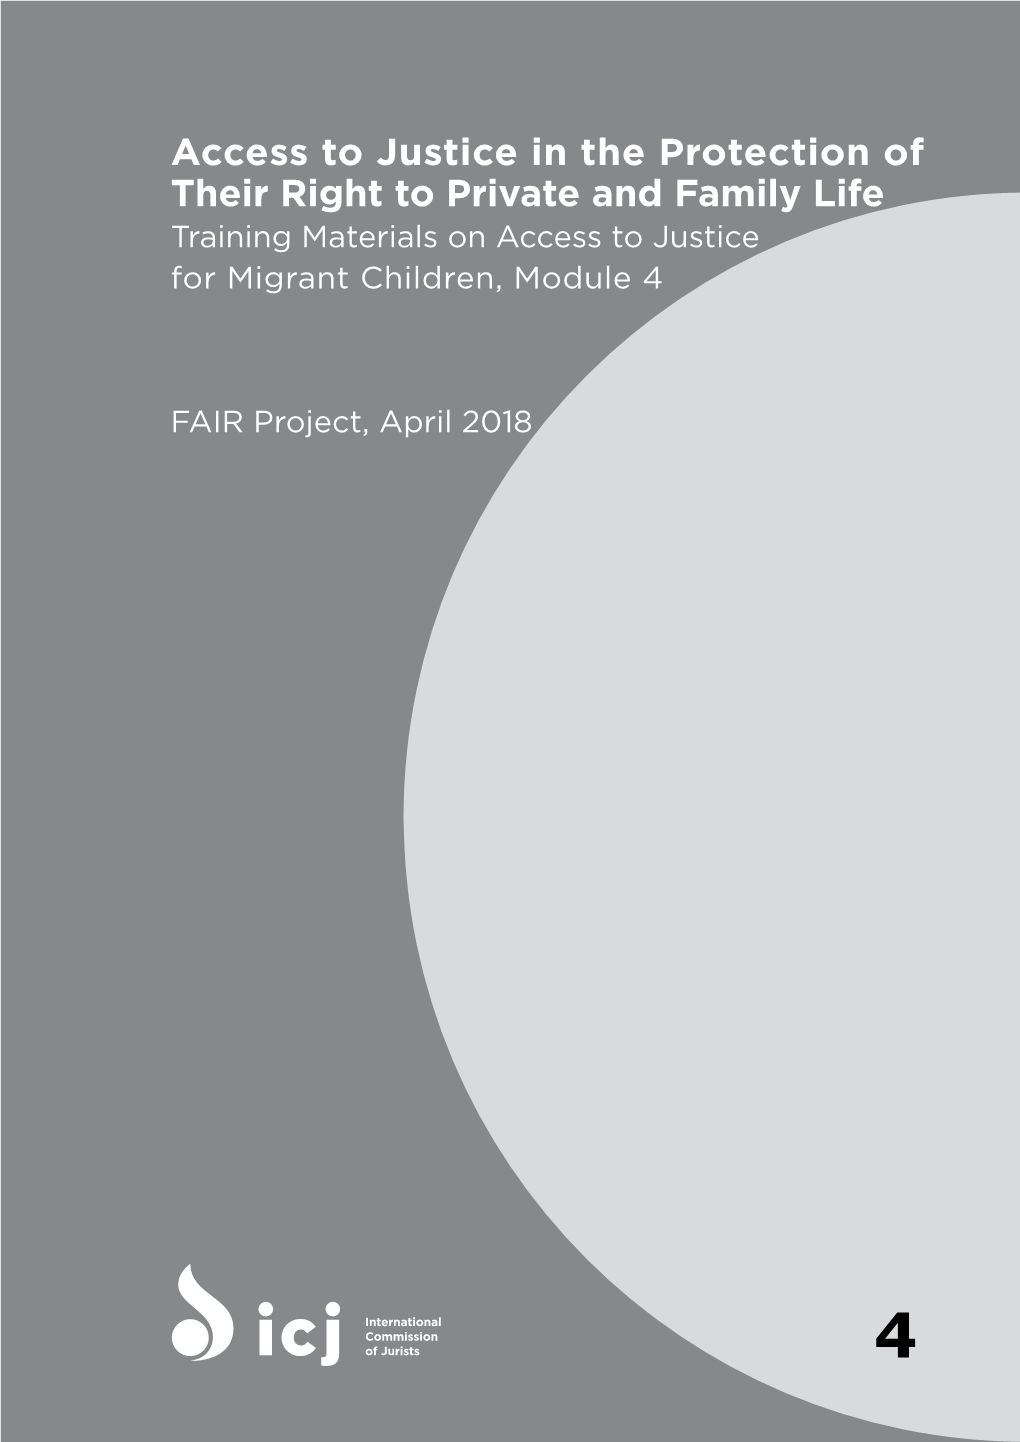 Access to Justice in the Protection of Their Right to Private and Family Life Training Materials on Access to Justice for Migrant Children, Module 4